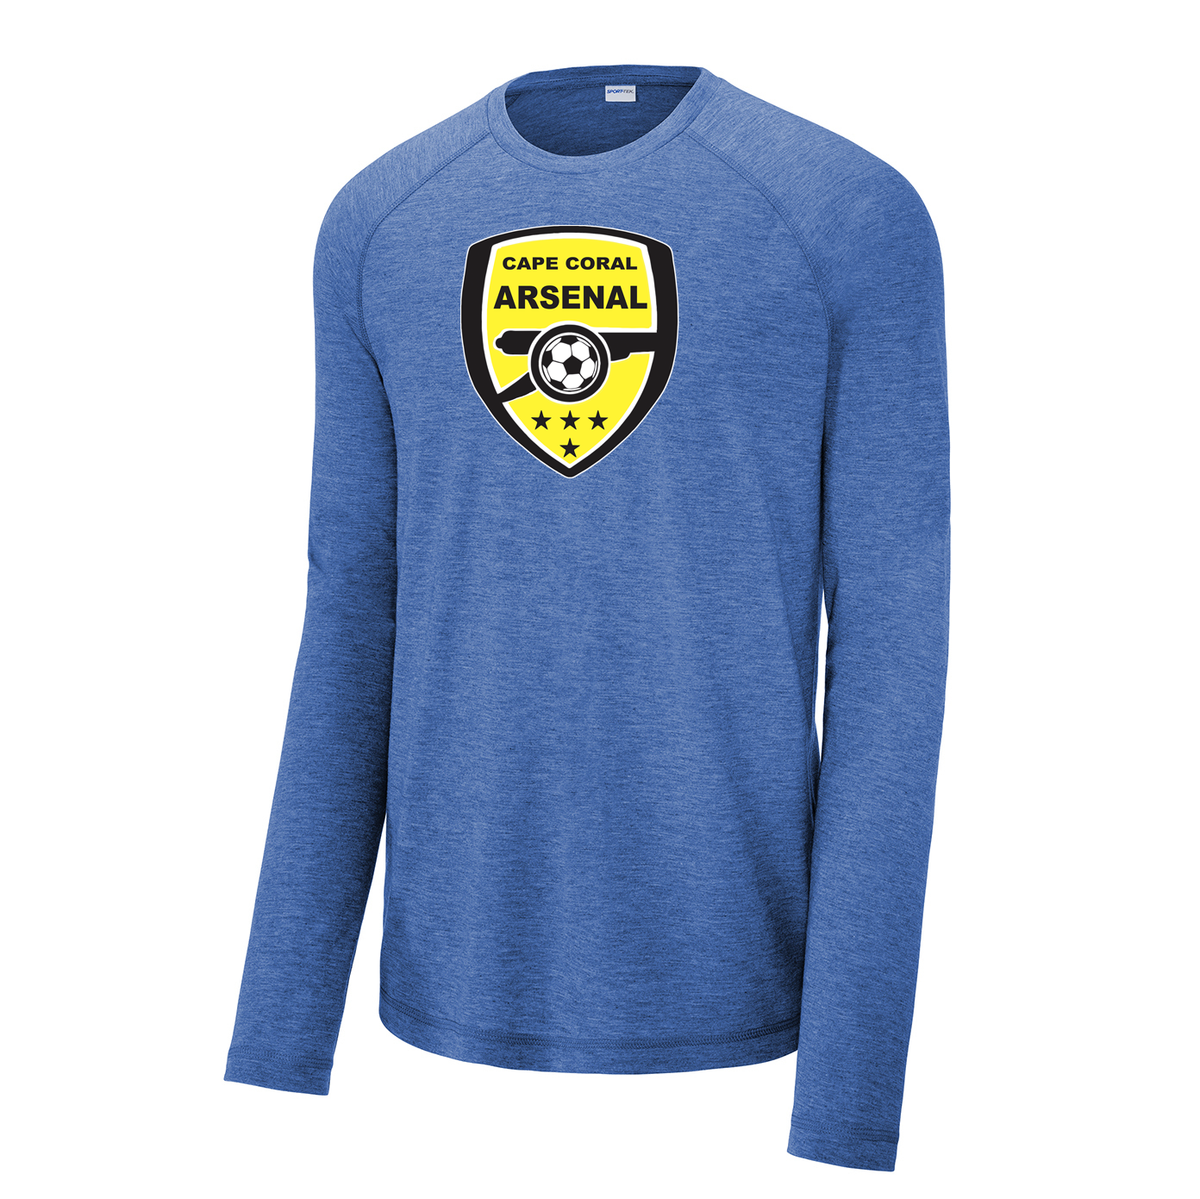 Cape Coral Arsenal Long Sleeve Raglan CottonTouch